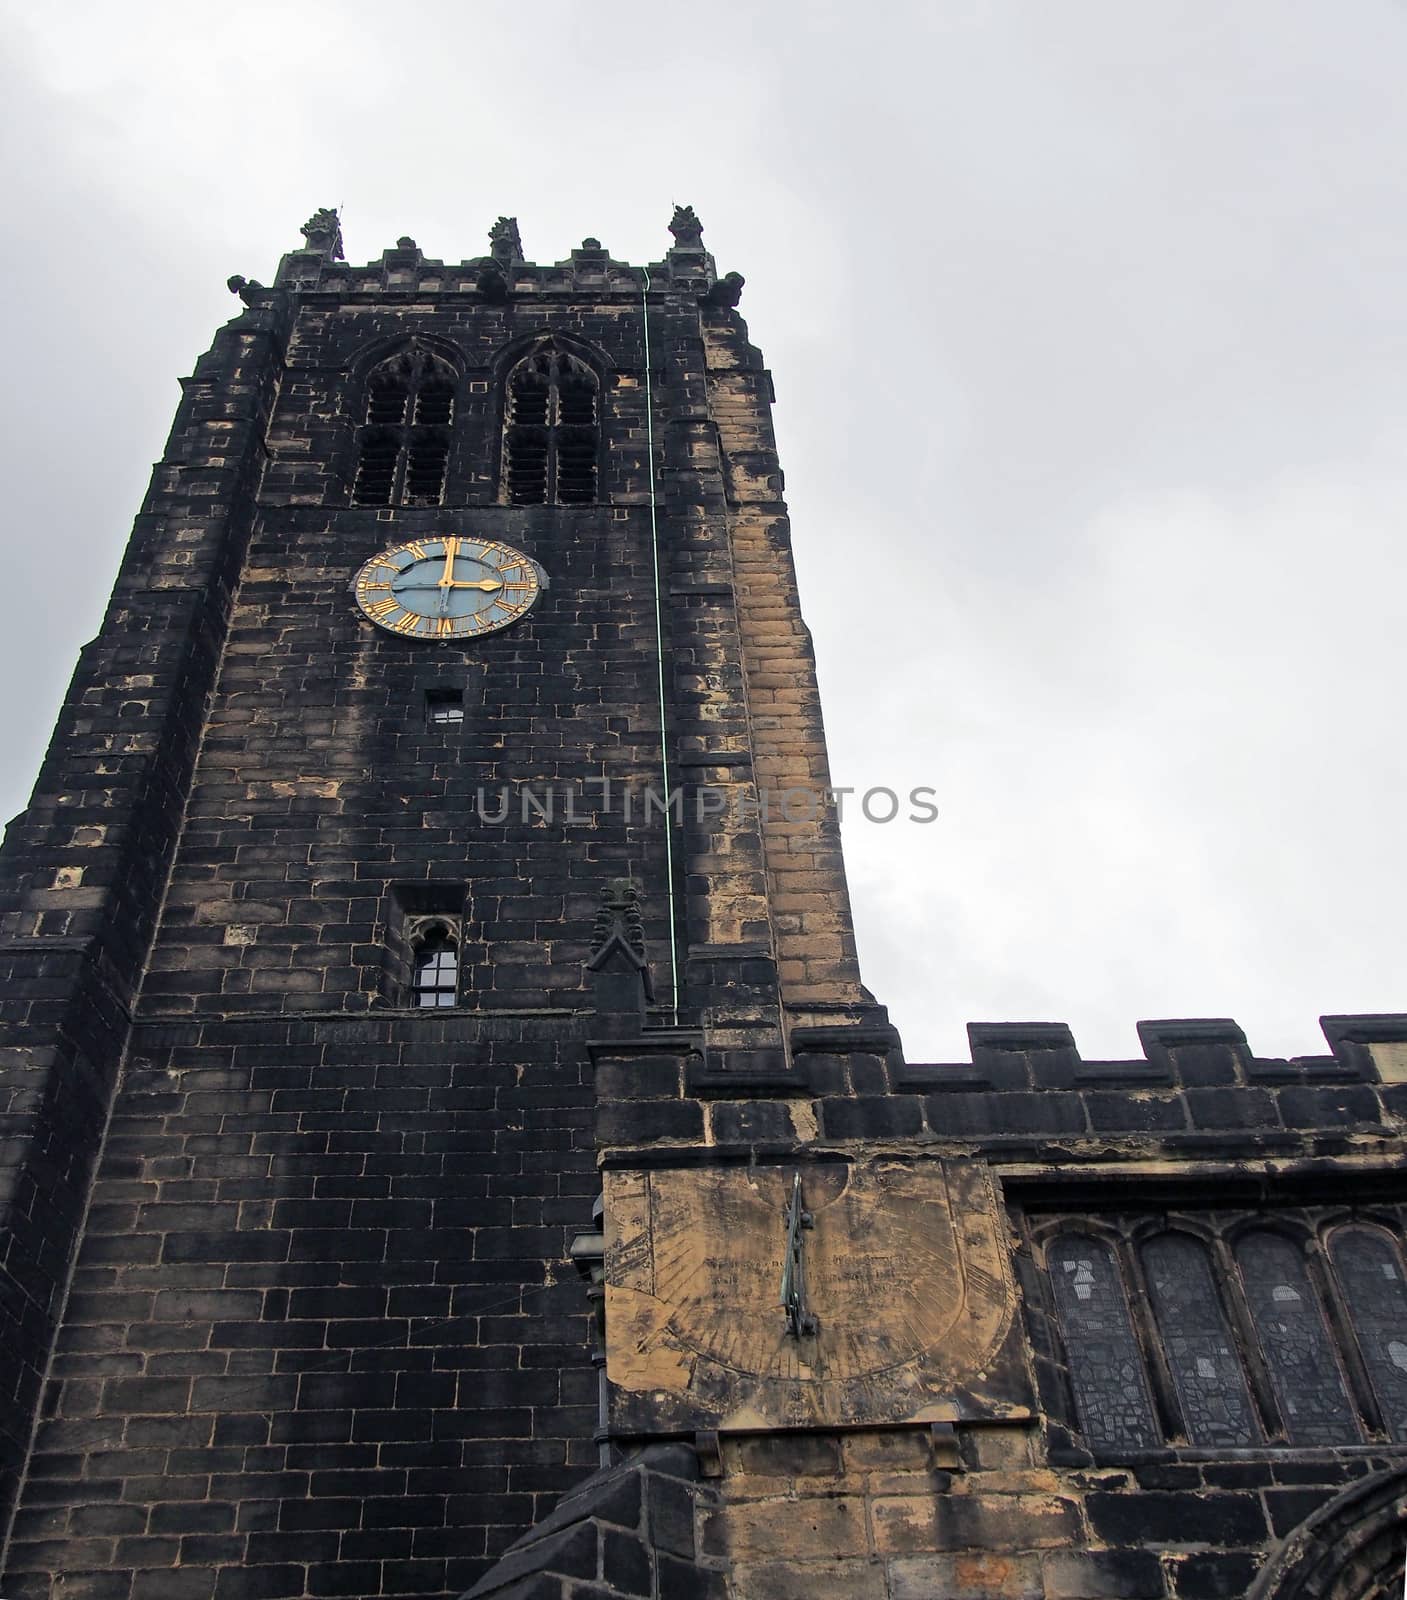 a view of halifax minster in west yorkshire with dark stonework on the medieval church tower and clock